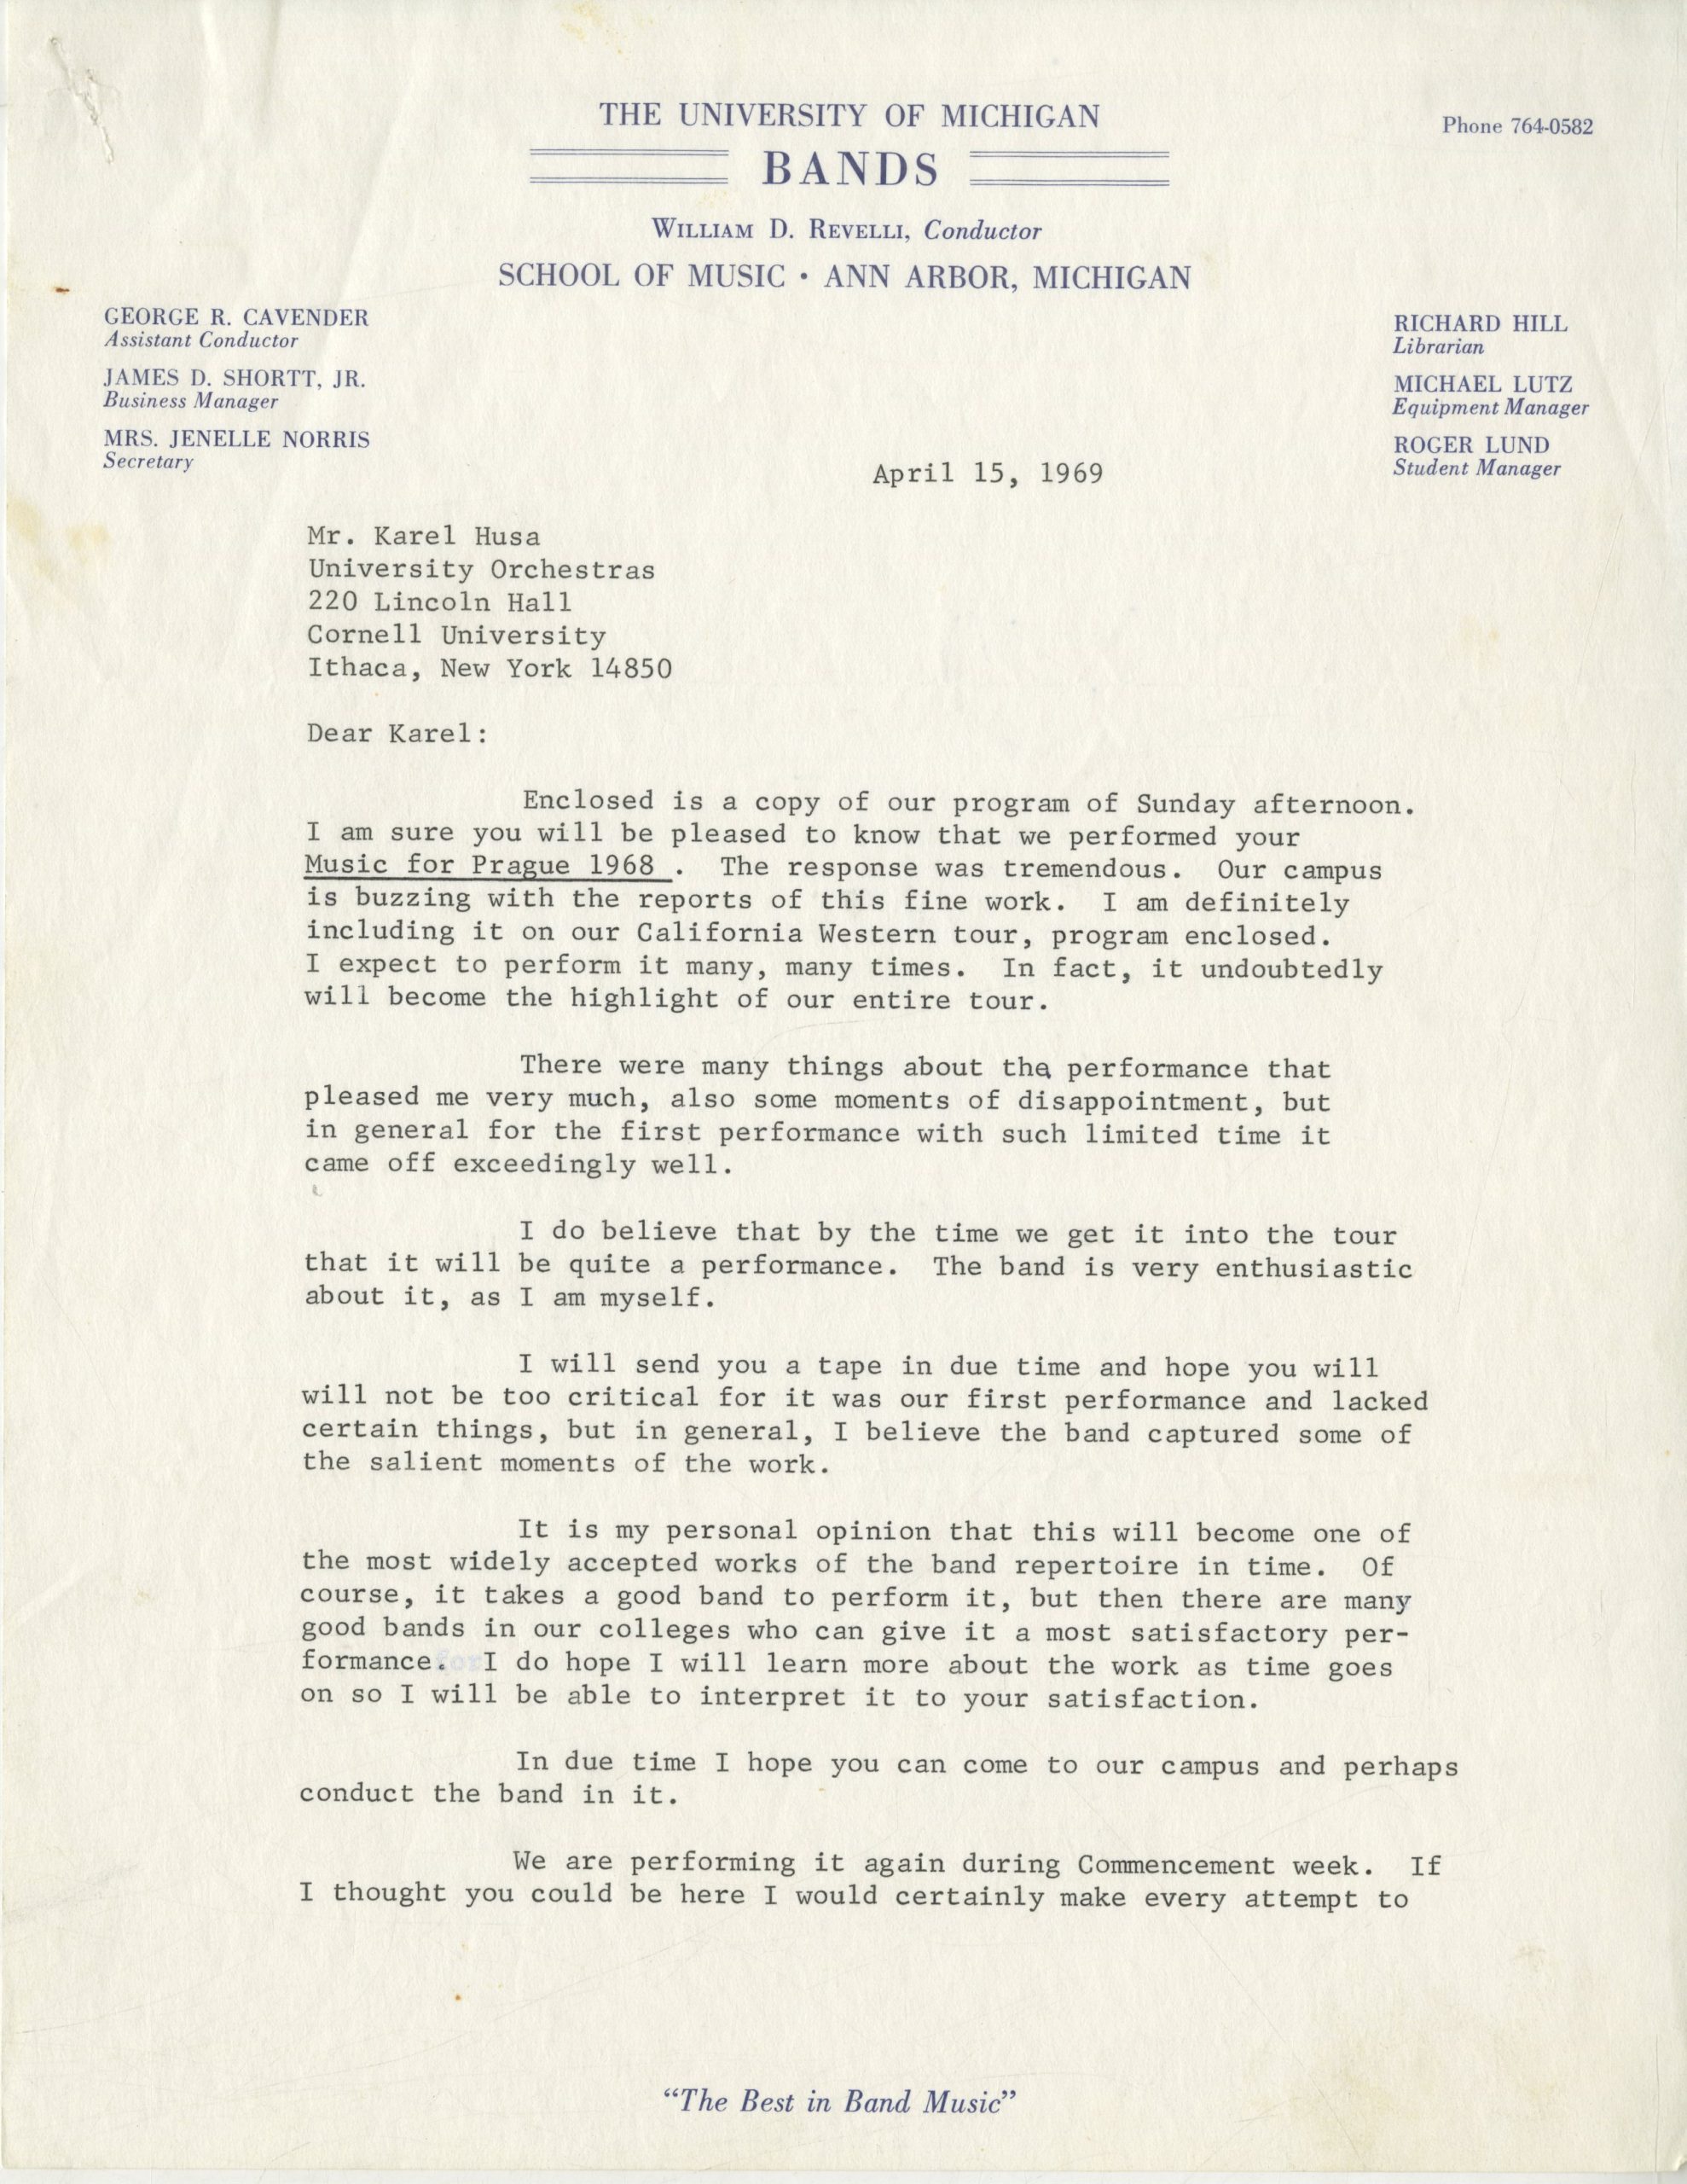 April 1969 letter from William Revelli (page 1).